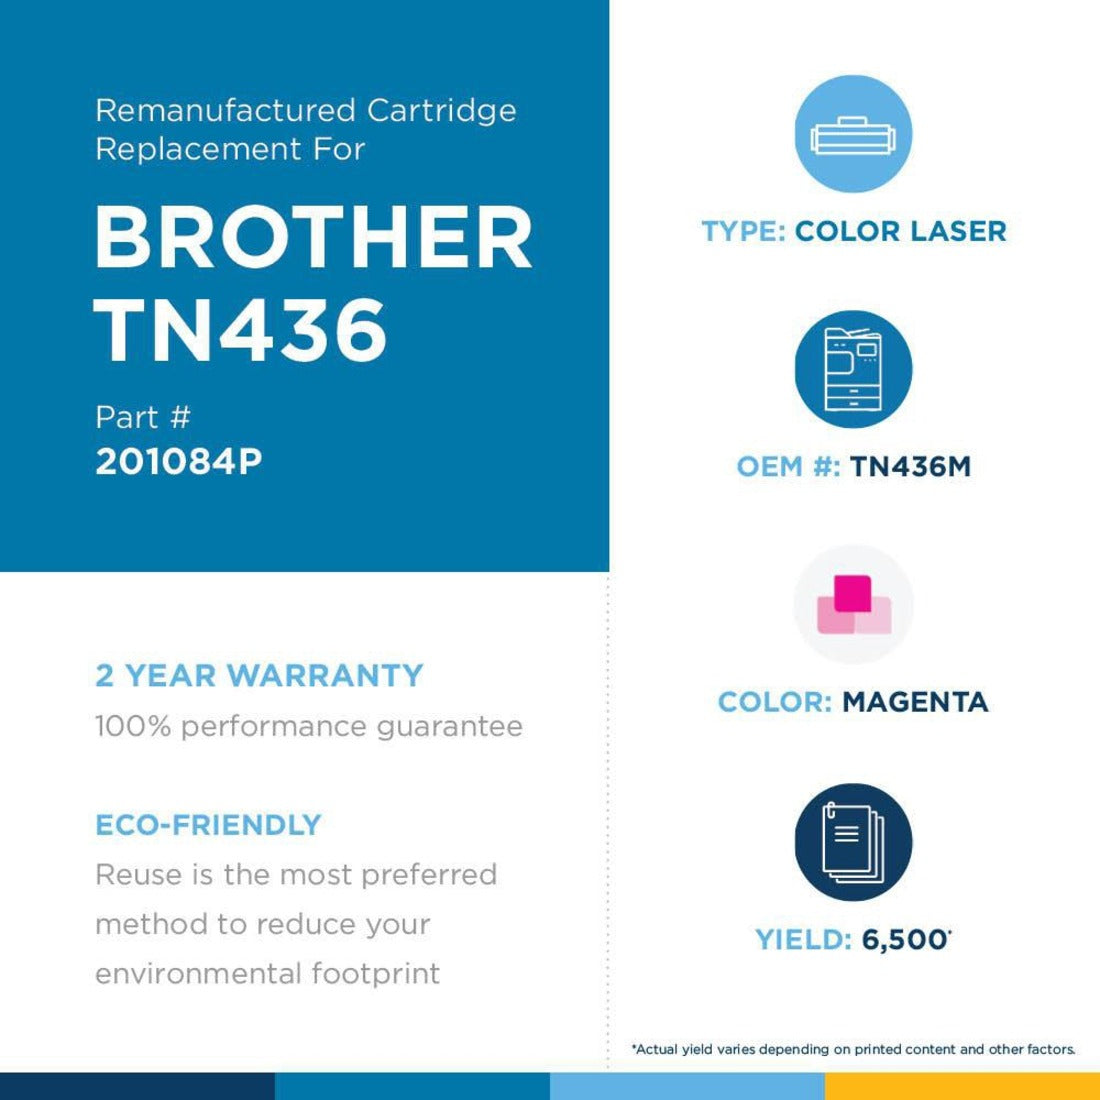 Clover Technologies Remanufactured Extra High Yield Laser Toner Cartridge - Alternative for Brother TN436M - Magenta Pack